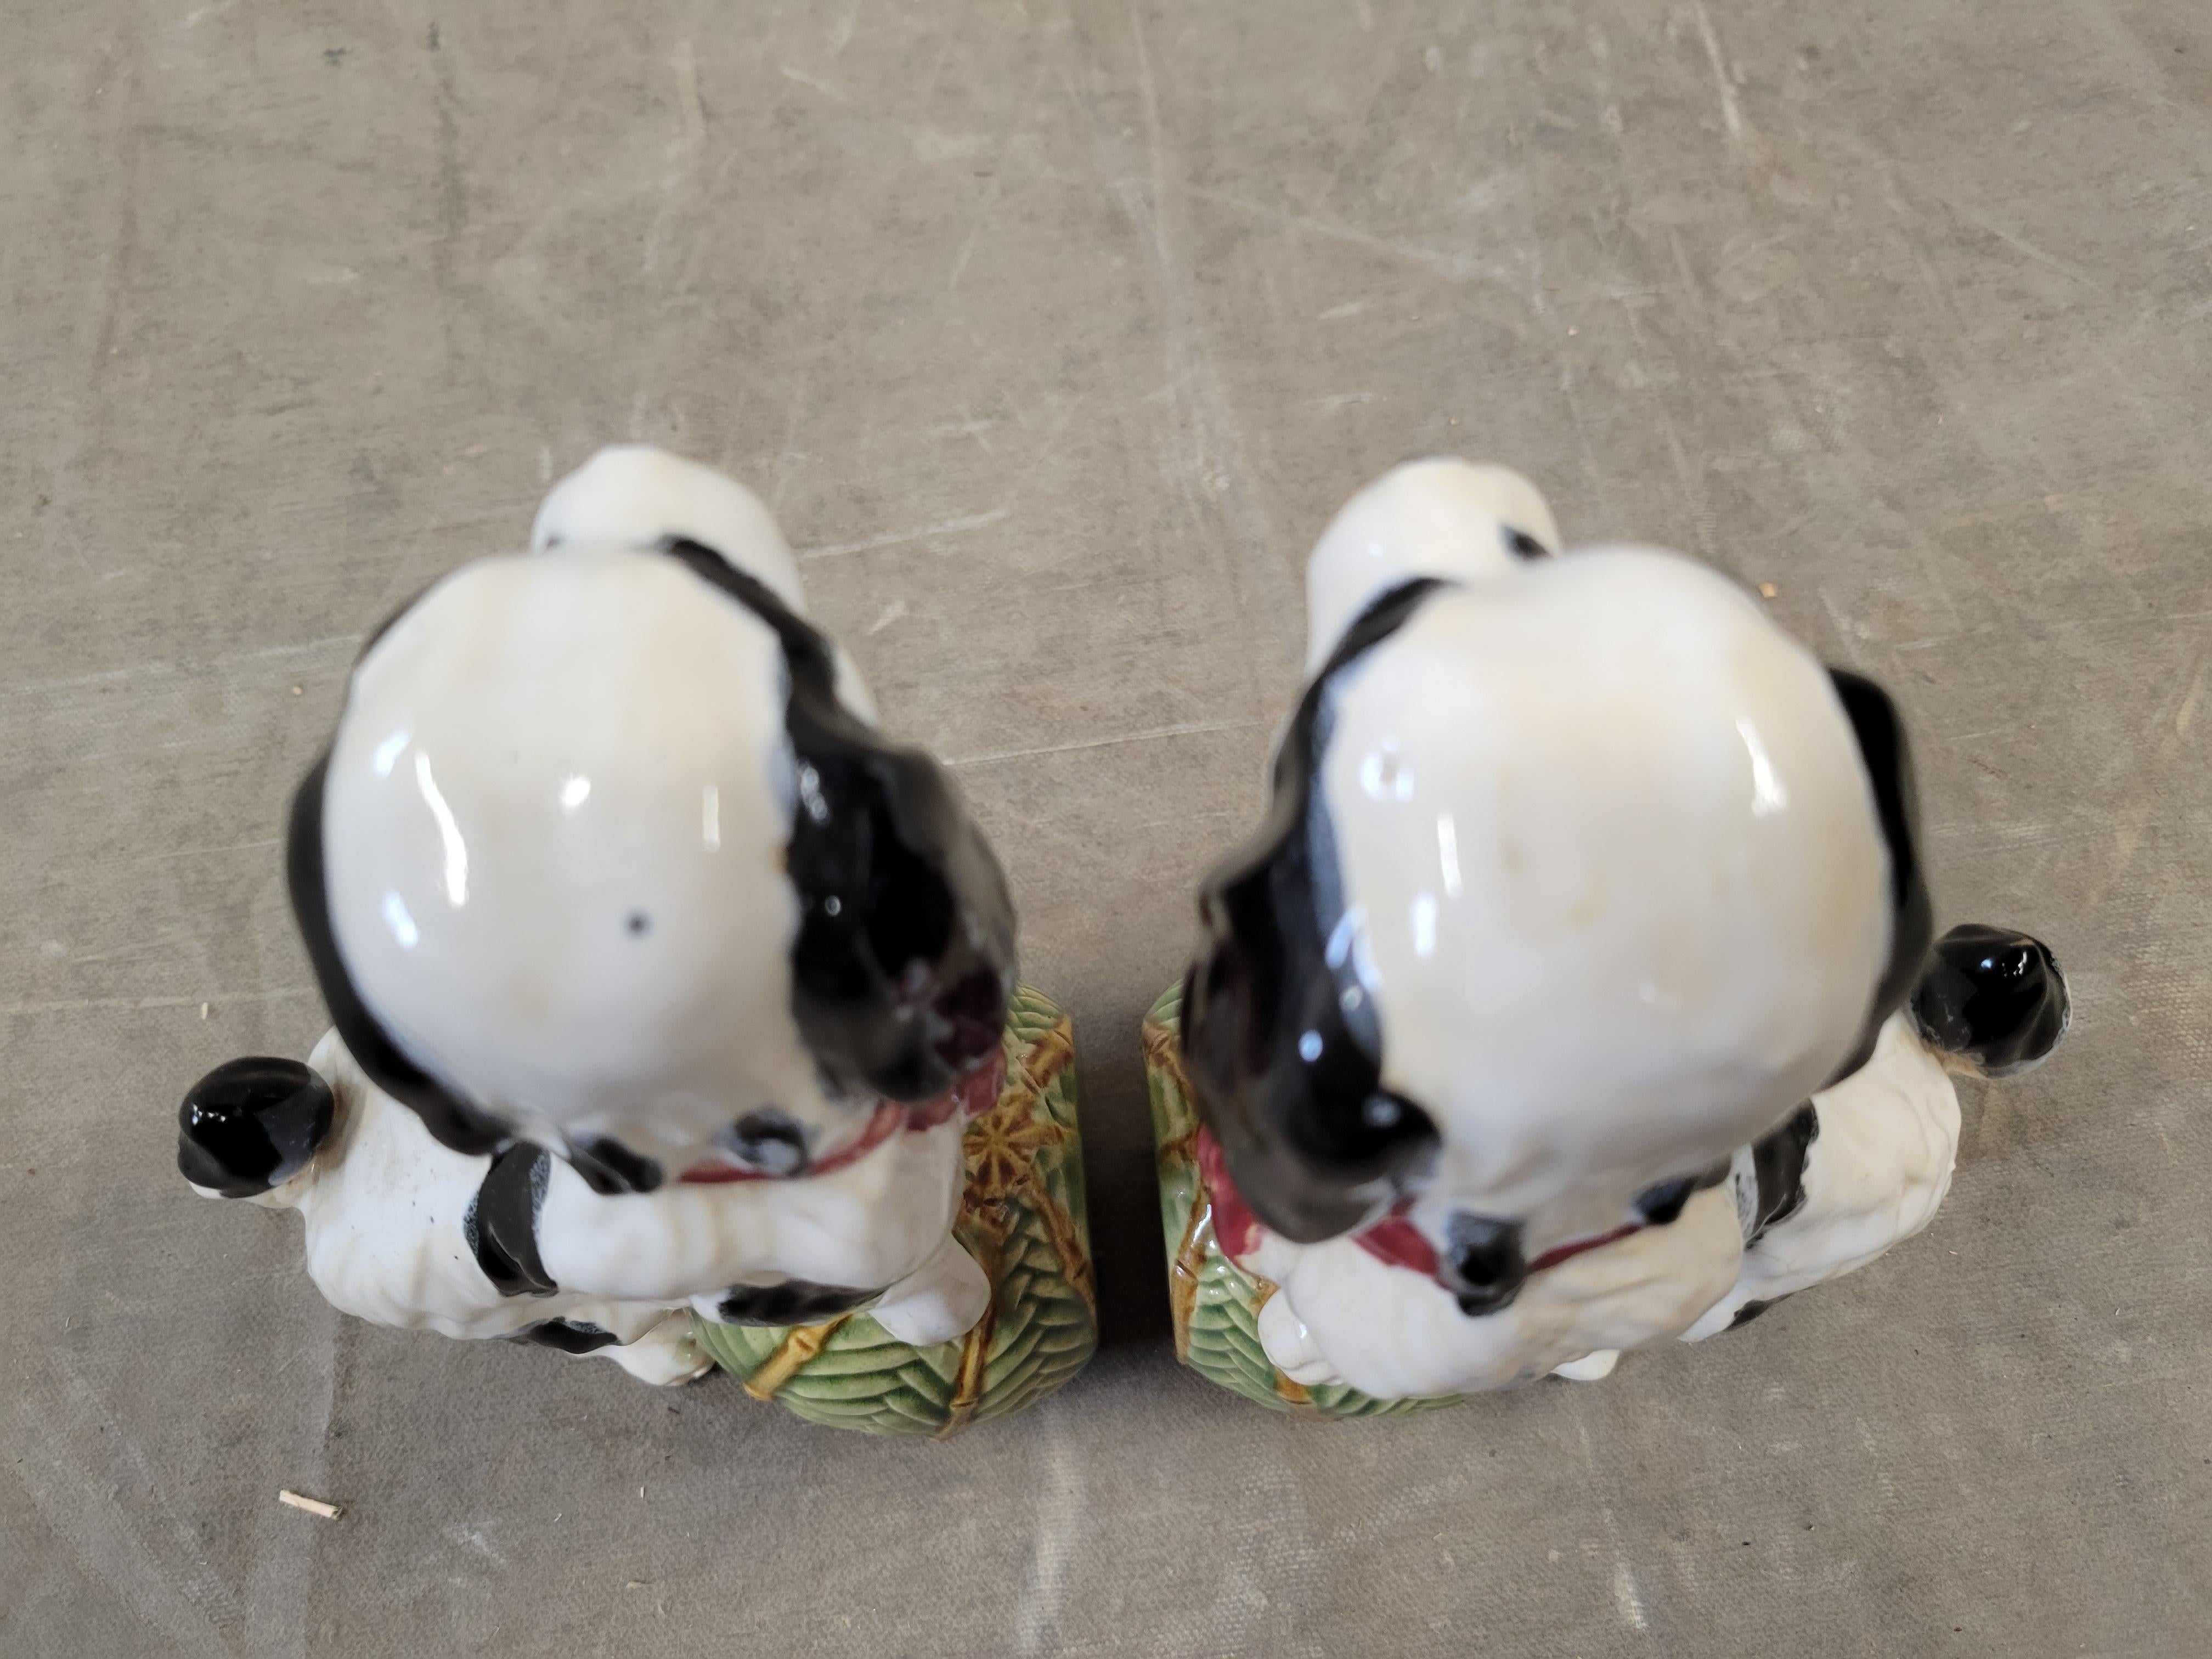 Vintage Majolica Staffordshire Cavalier King Charles Spaniel Bookends - a Pair For Sale 4